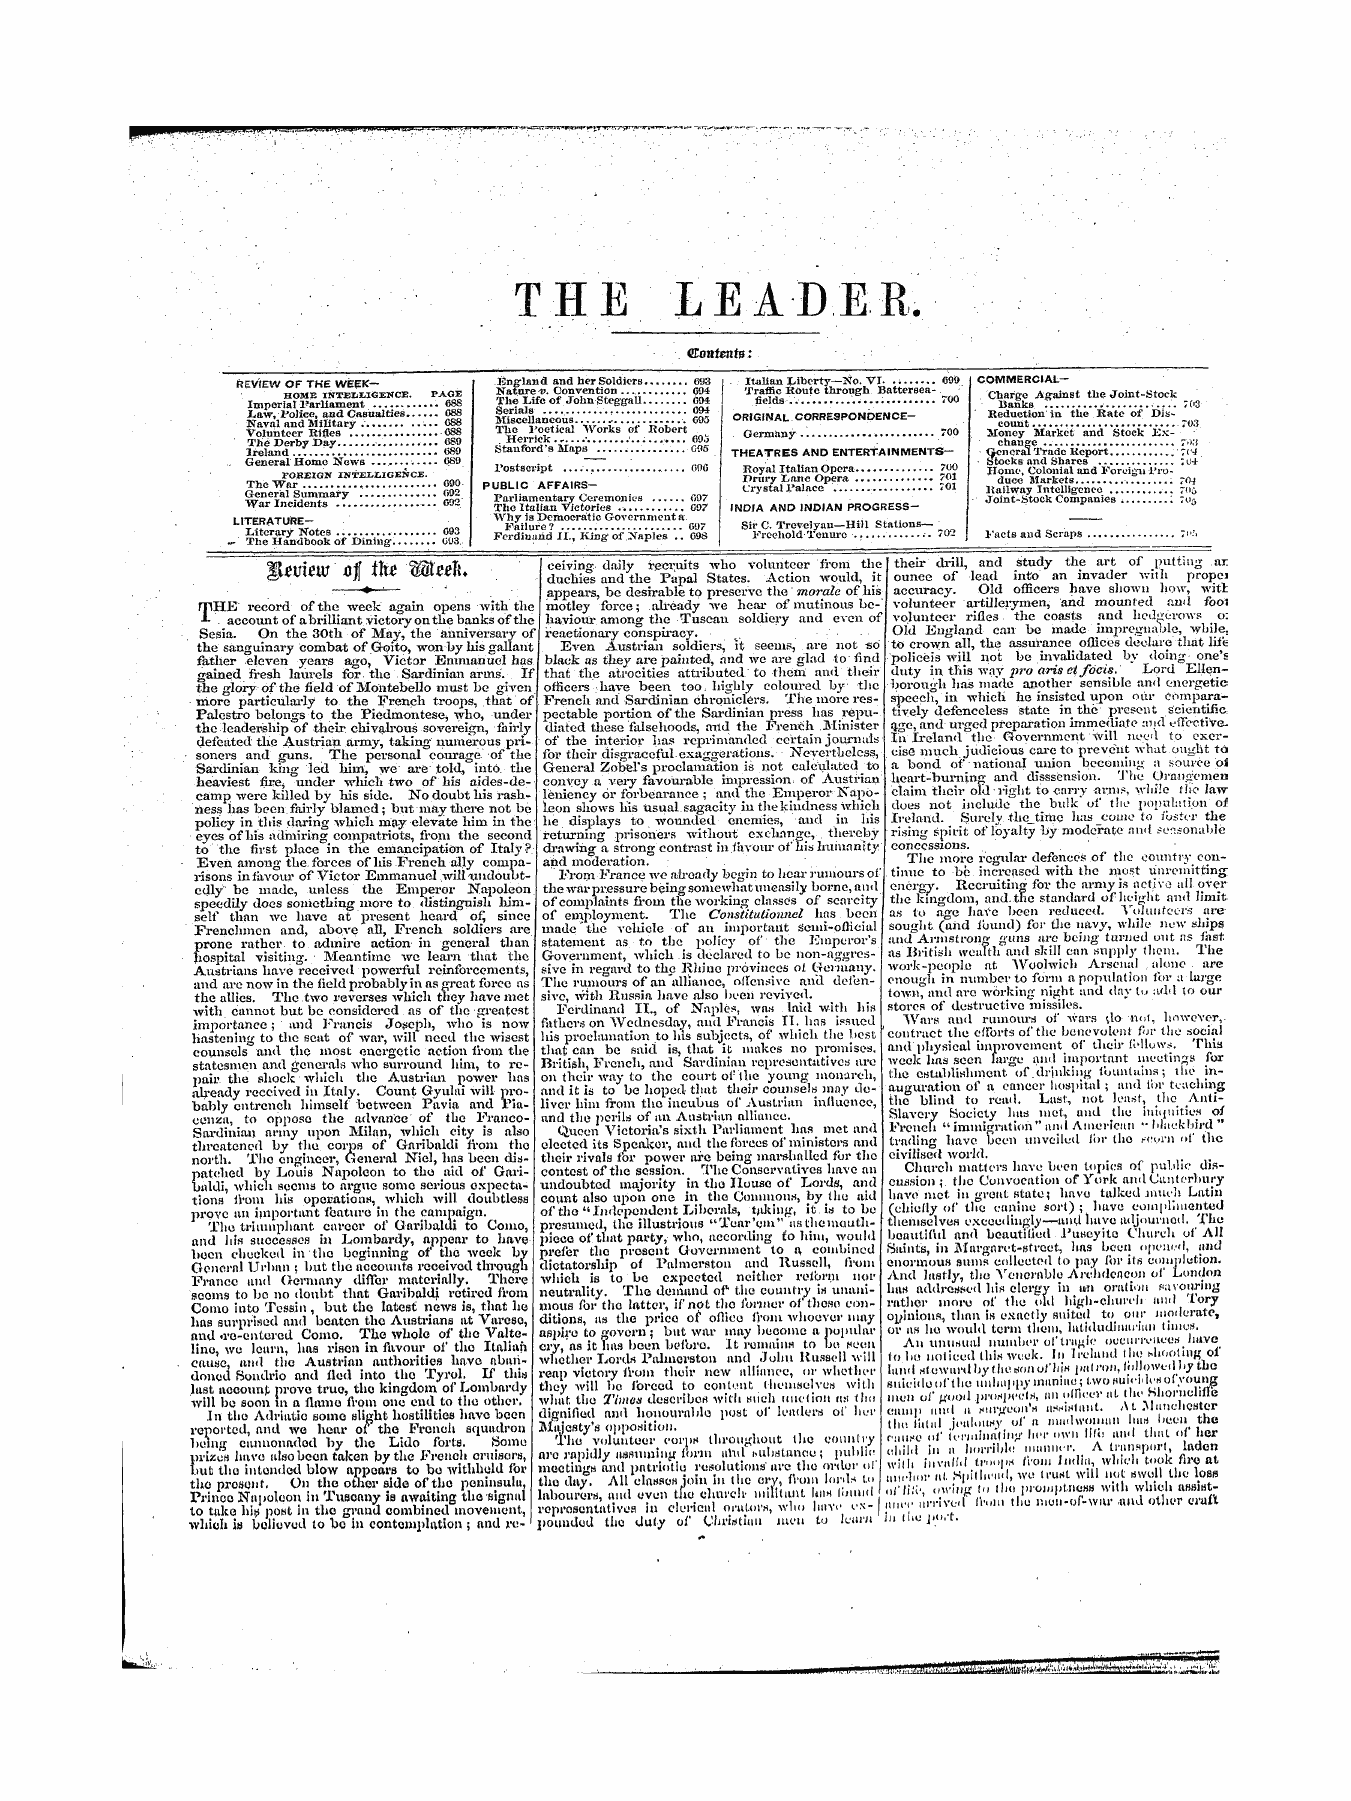 Leader (1850-1860): jS F Y, 1st edition: 3